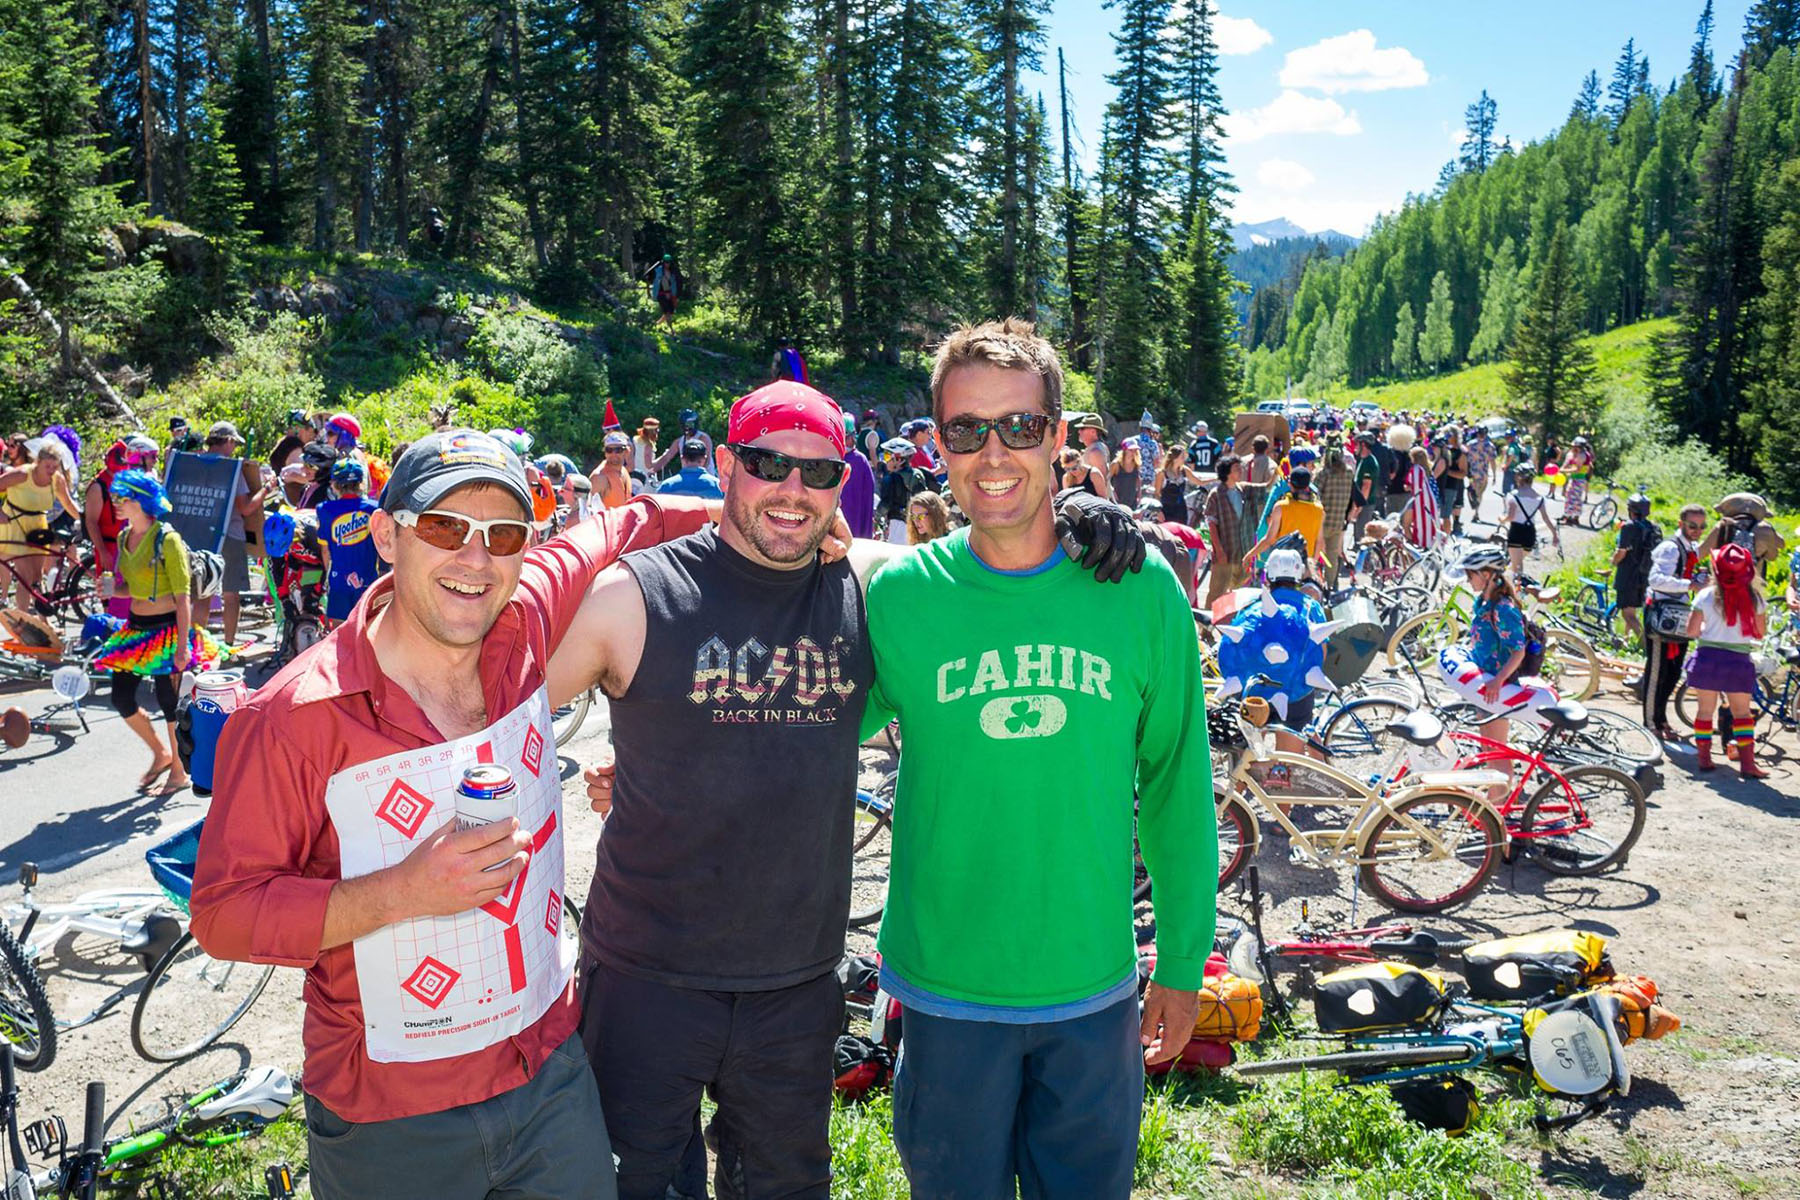 Crested Butte's Chainless World Championships Bike Race